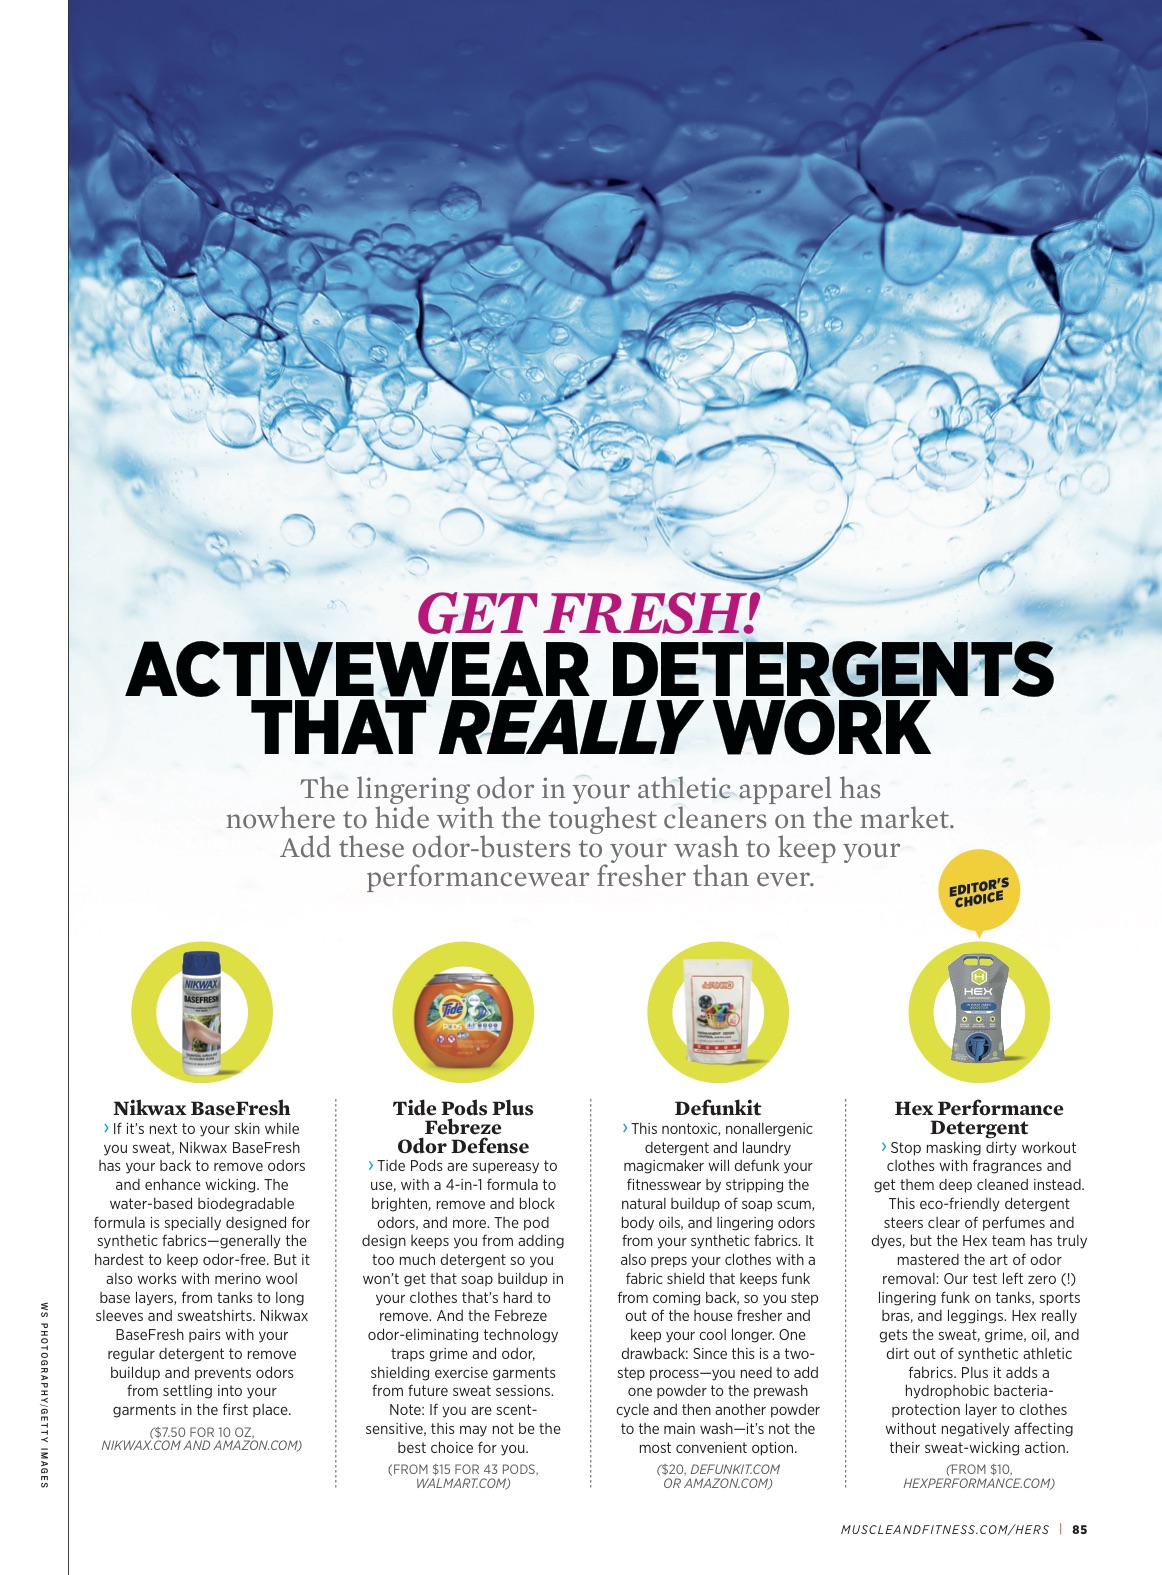 Best Detergents for Outdoor Gear/Clothes